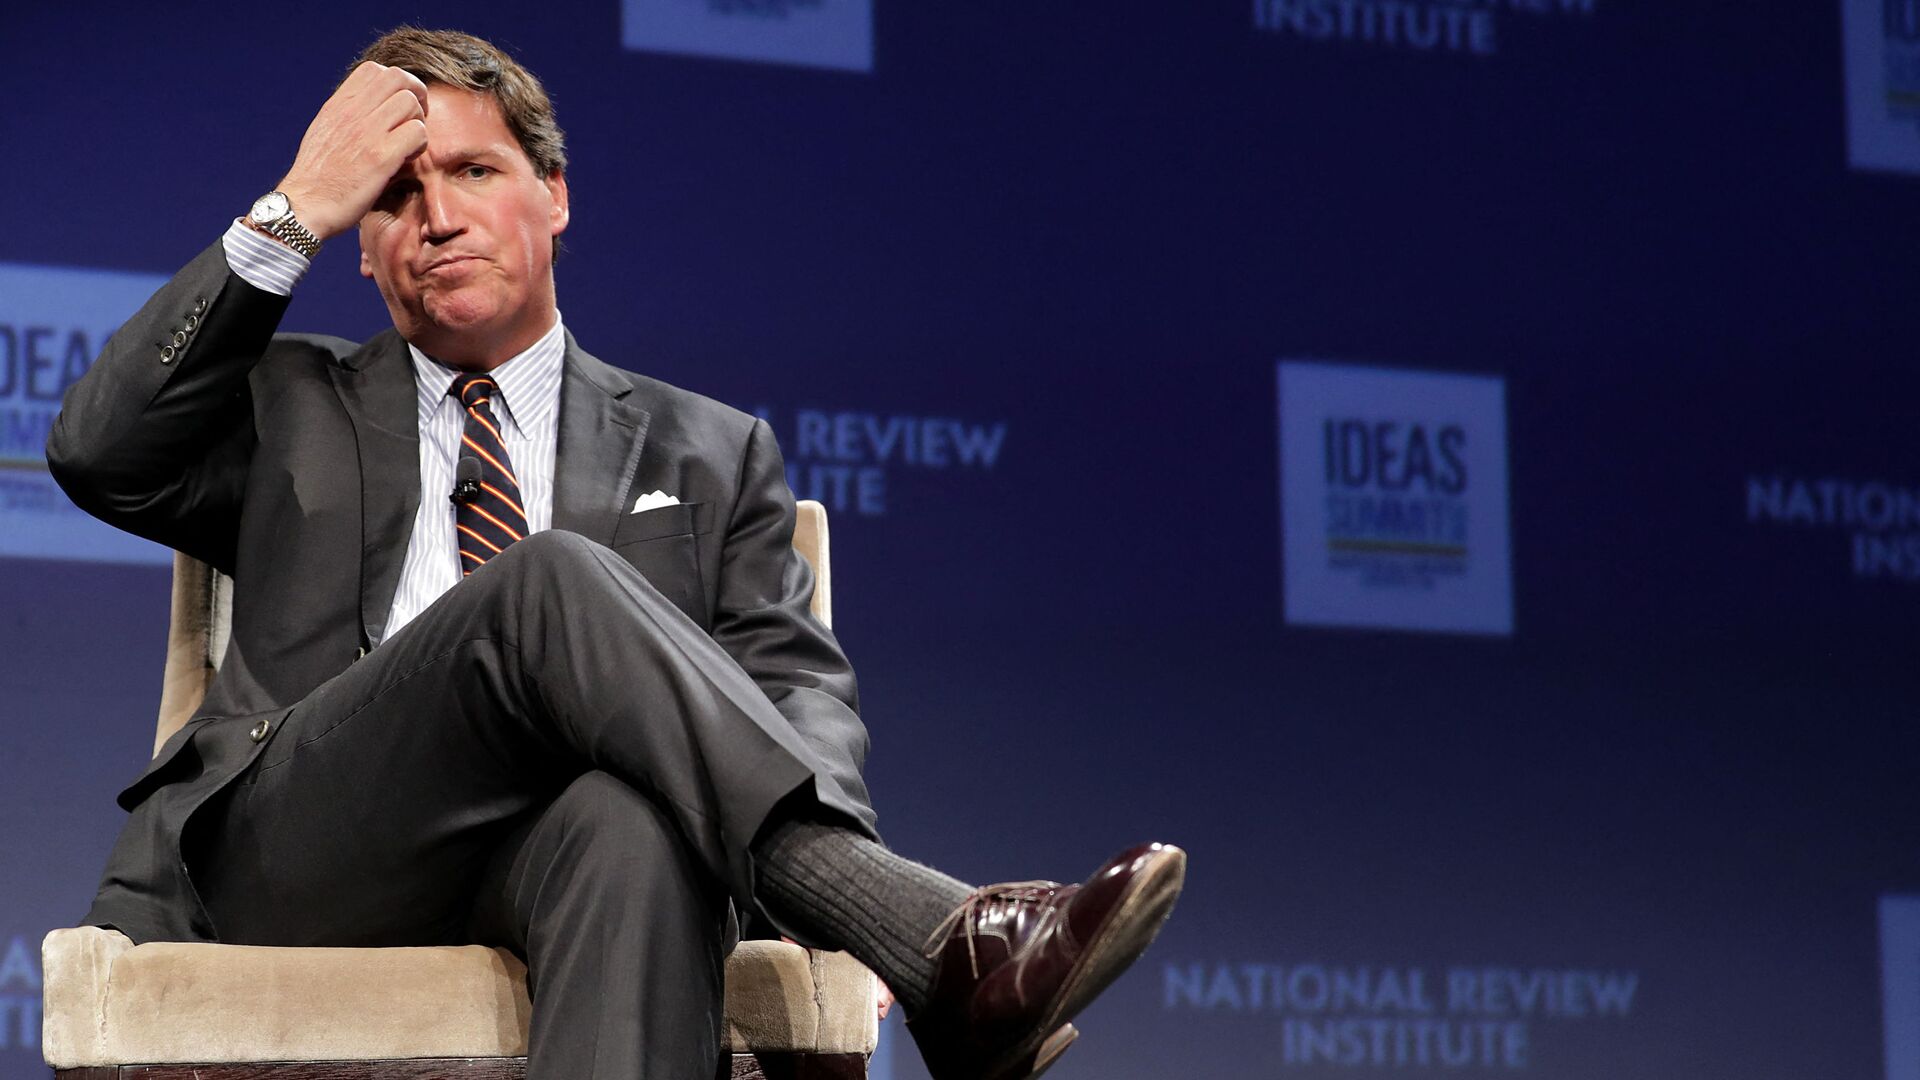 WASHINGTON, DC - MARCH 29: Fox News host Tucker Carlson discusses 'Populism and the Right' during the National Review Institute's Ideas Summit at the Mandarin Oriental Hotel March 29, 2019 in Washington, DC. - Sputnik International, 1920, 22.11.2021